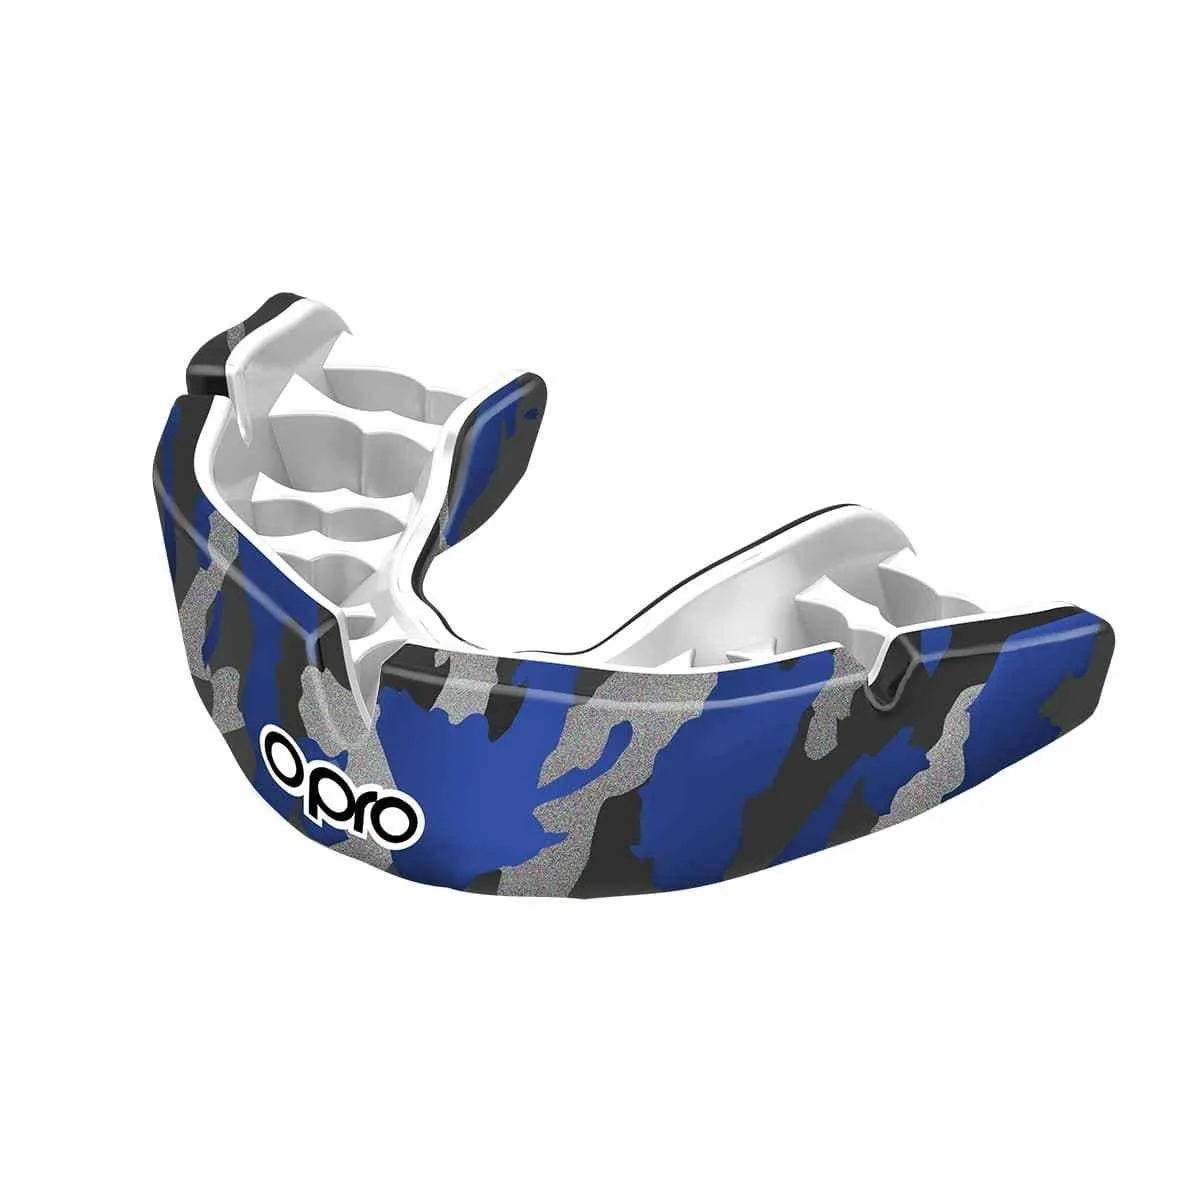 OPRO mouthguard Instant Custom Fit Camo white/black/silver